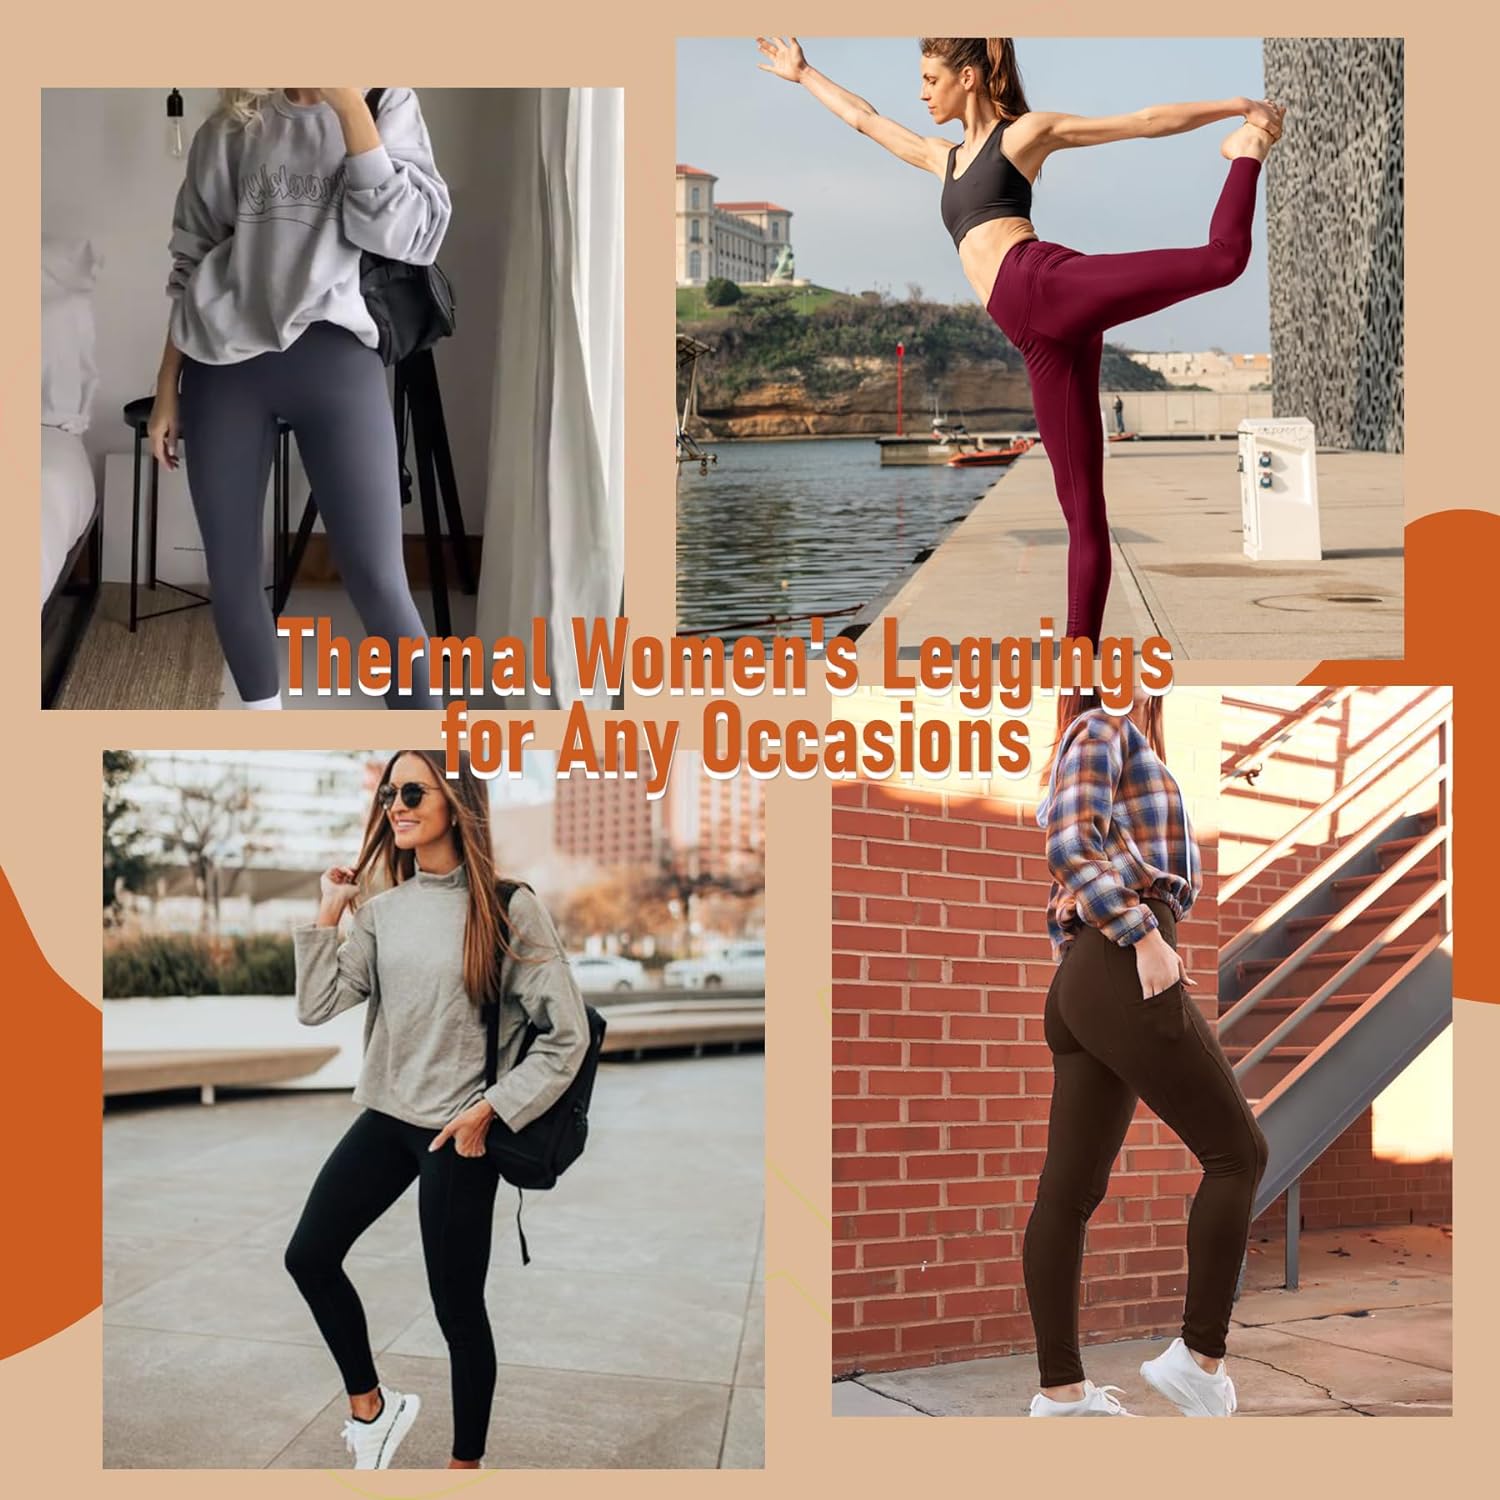 HIGHDAYS 3 Pack Fleece Lined Leggings for Women with Pockets - High Waist Winter Thermal Womens Workout Running Yoga Pants